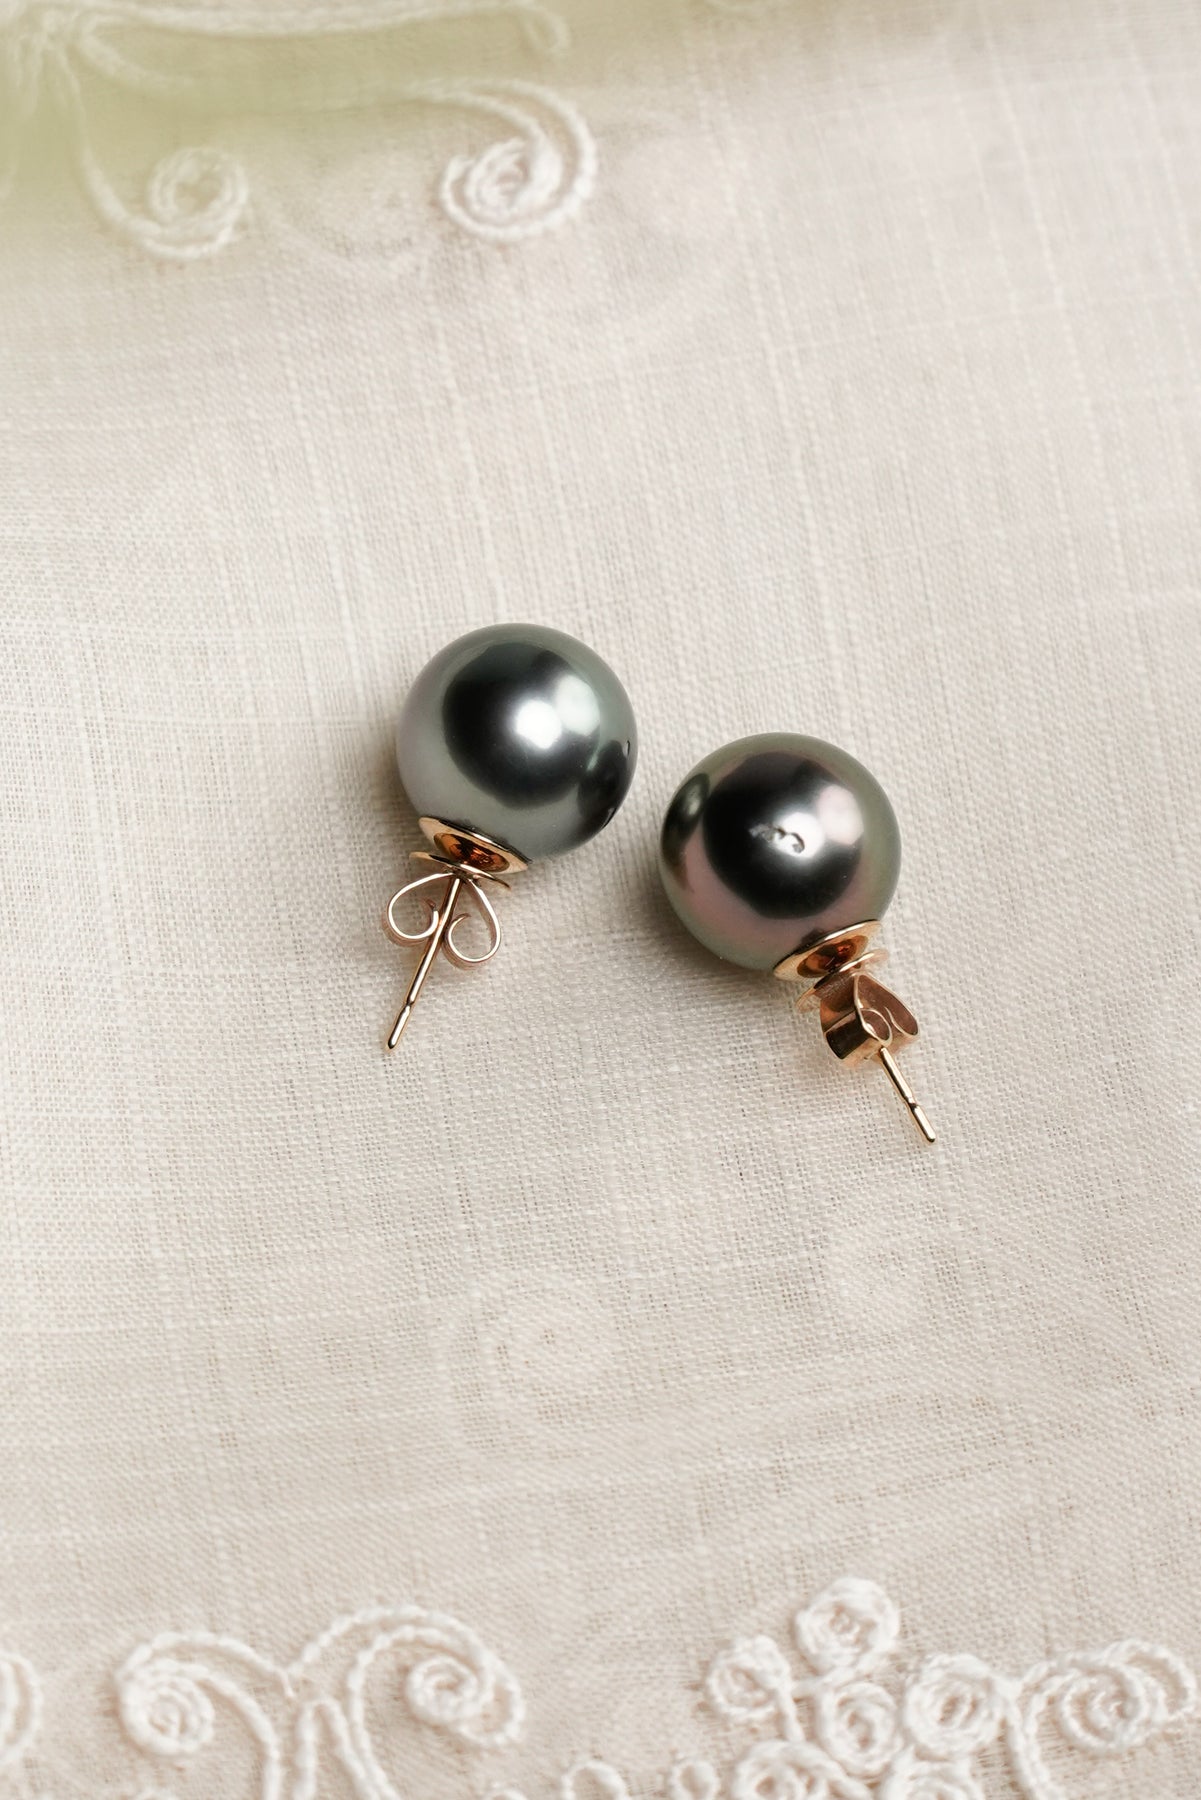 Shop Locally Sourced Philippine Pearls Online | Kultura Filipino – Page ...